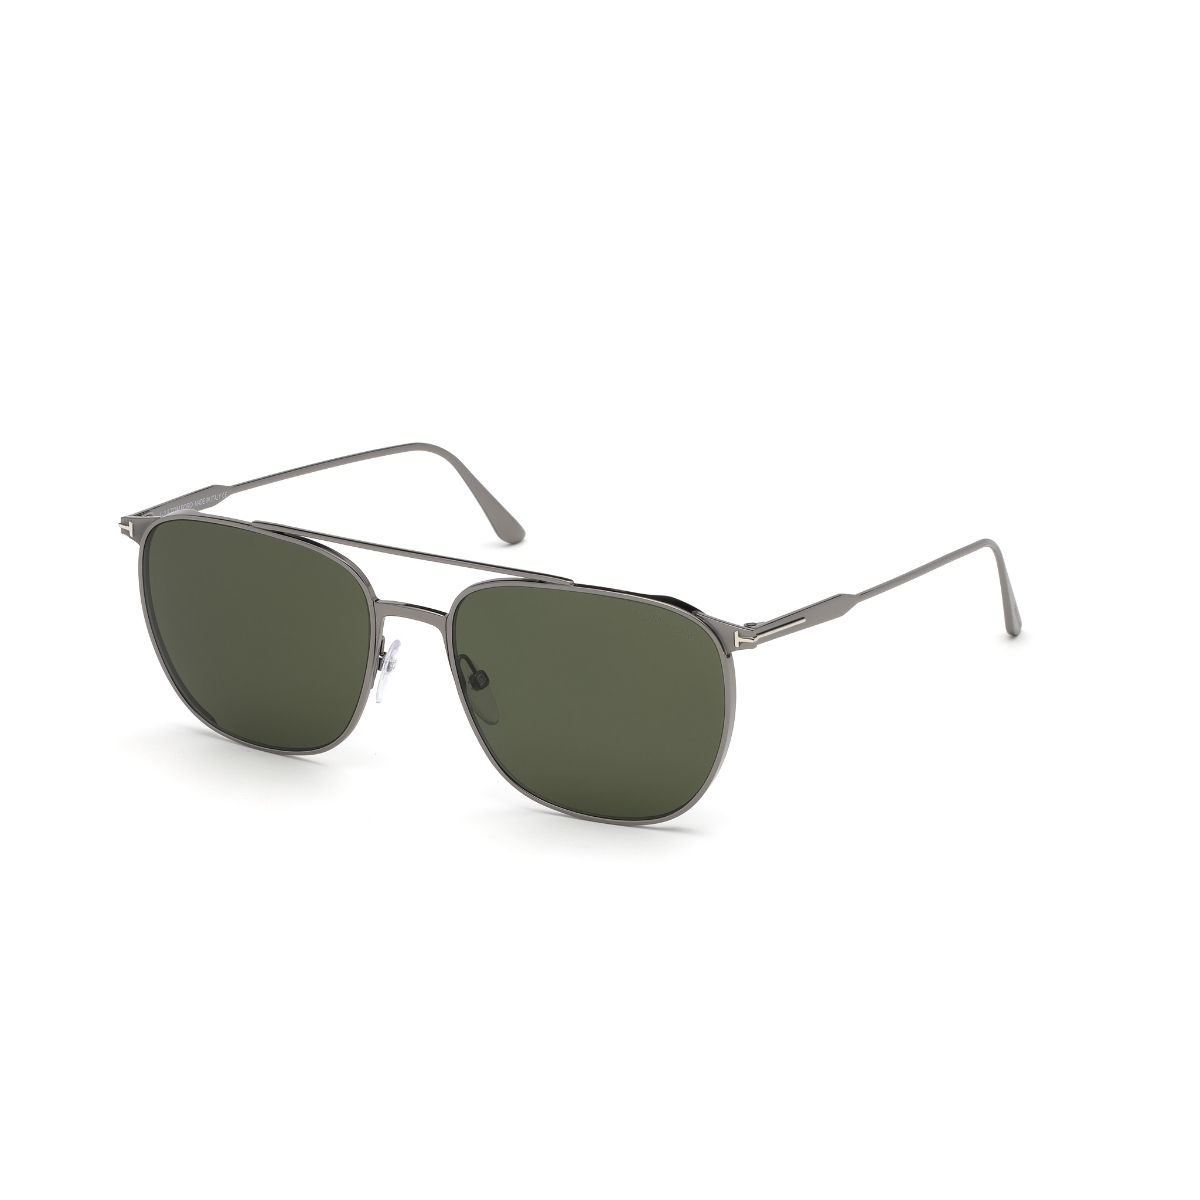 Tom Ford FT0692 58 12n Iconic Beveled Shapes In Premium Metal Sunglasses:  Buy Tom Ford FT0692 58 12n Iconic Beveled Shapes In Premium Metal  Sunglasses Online at Best Price in India | Nykaa